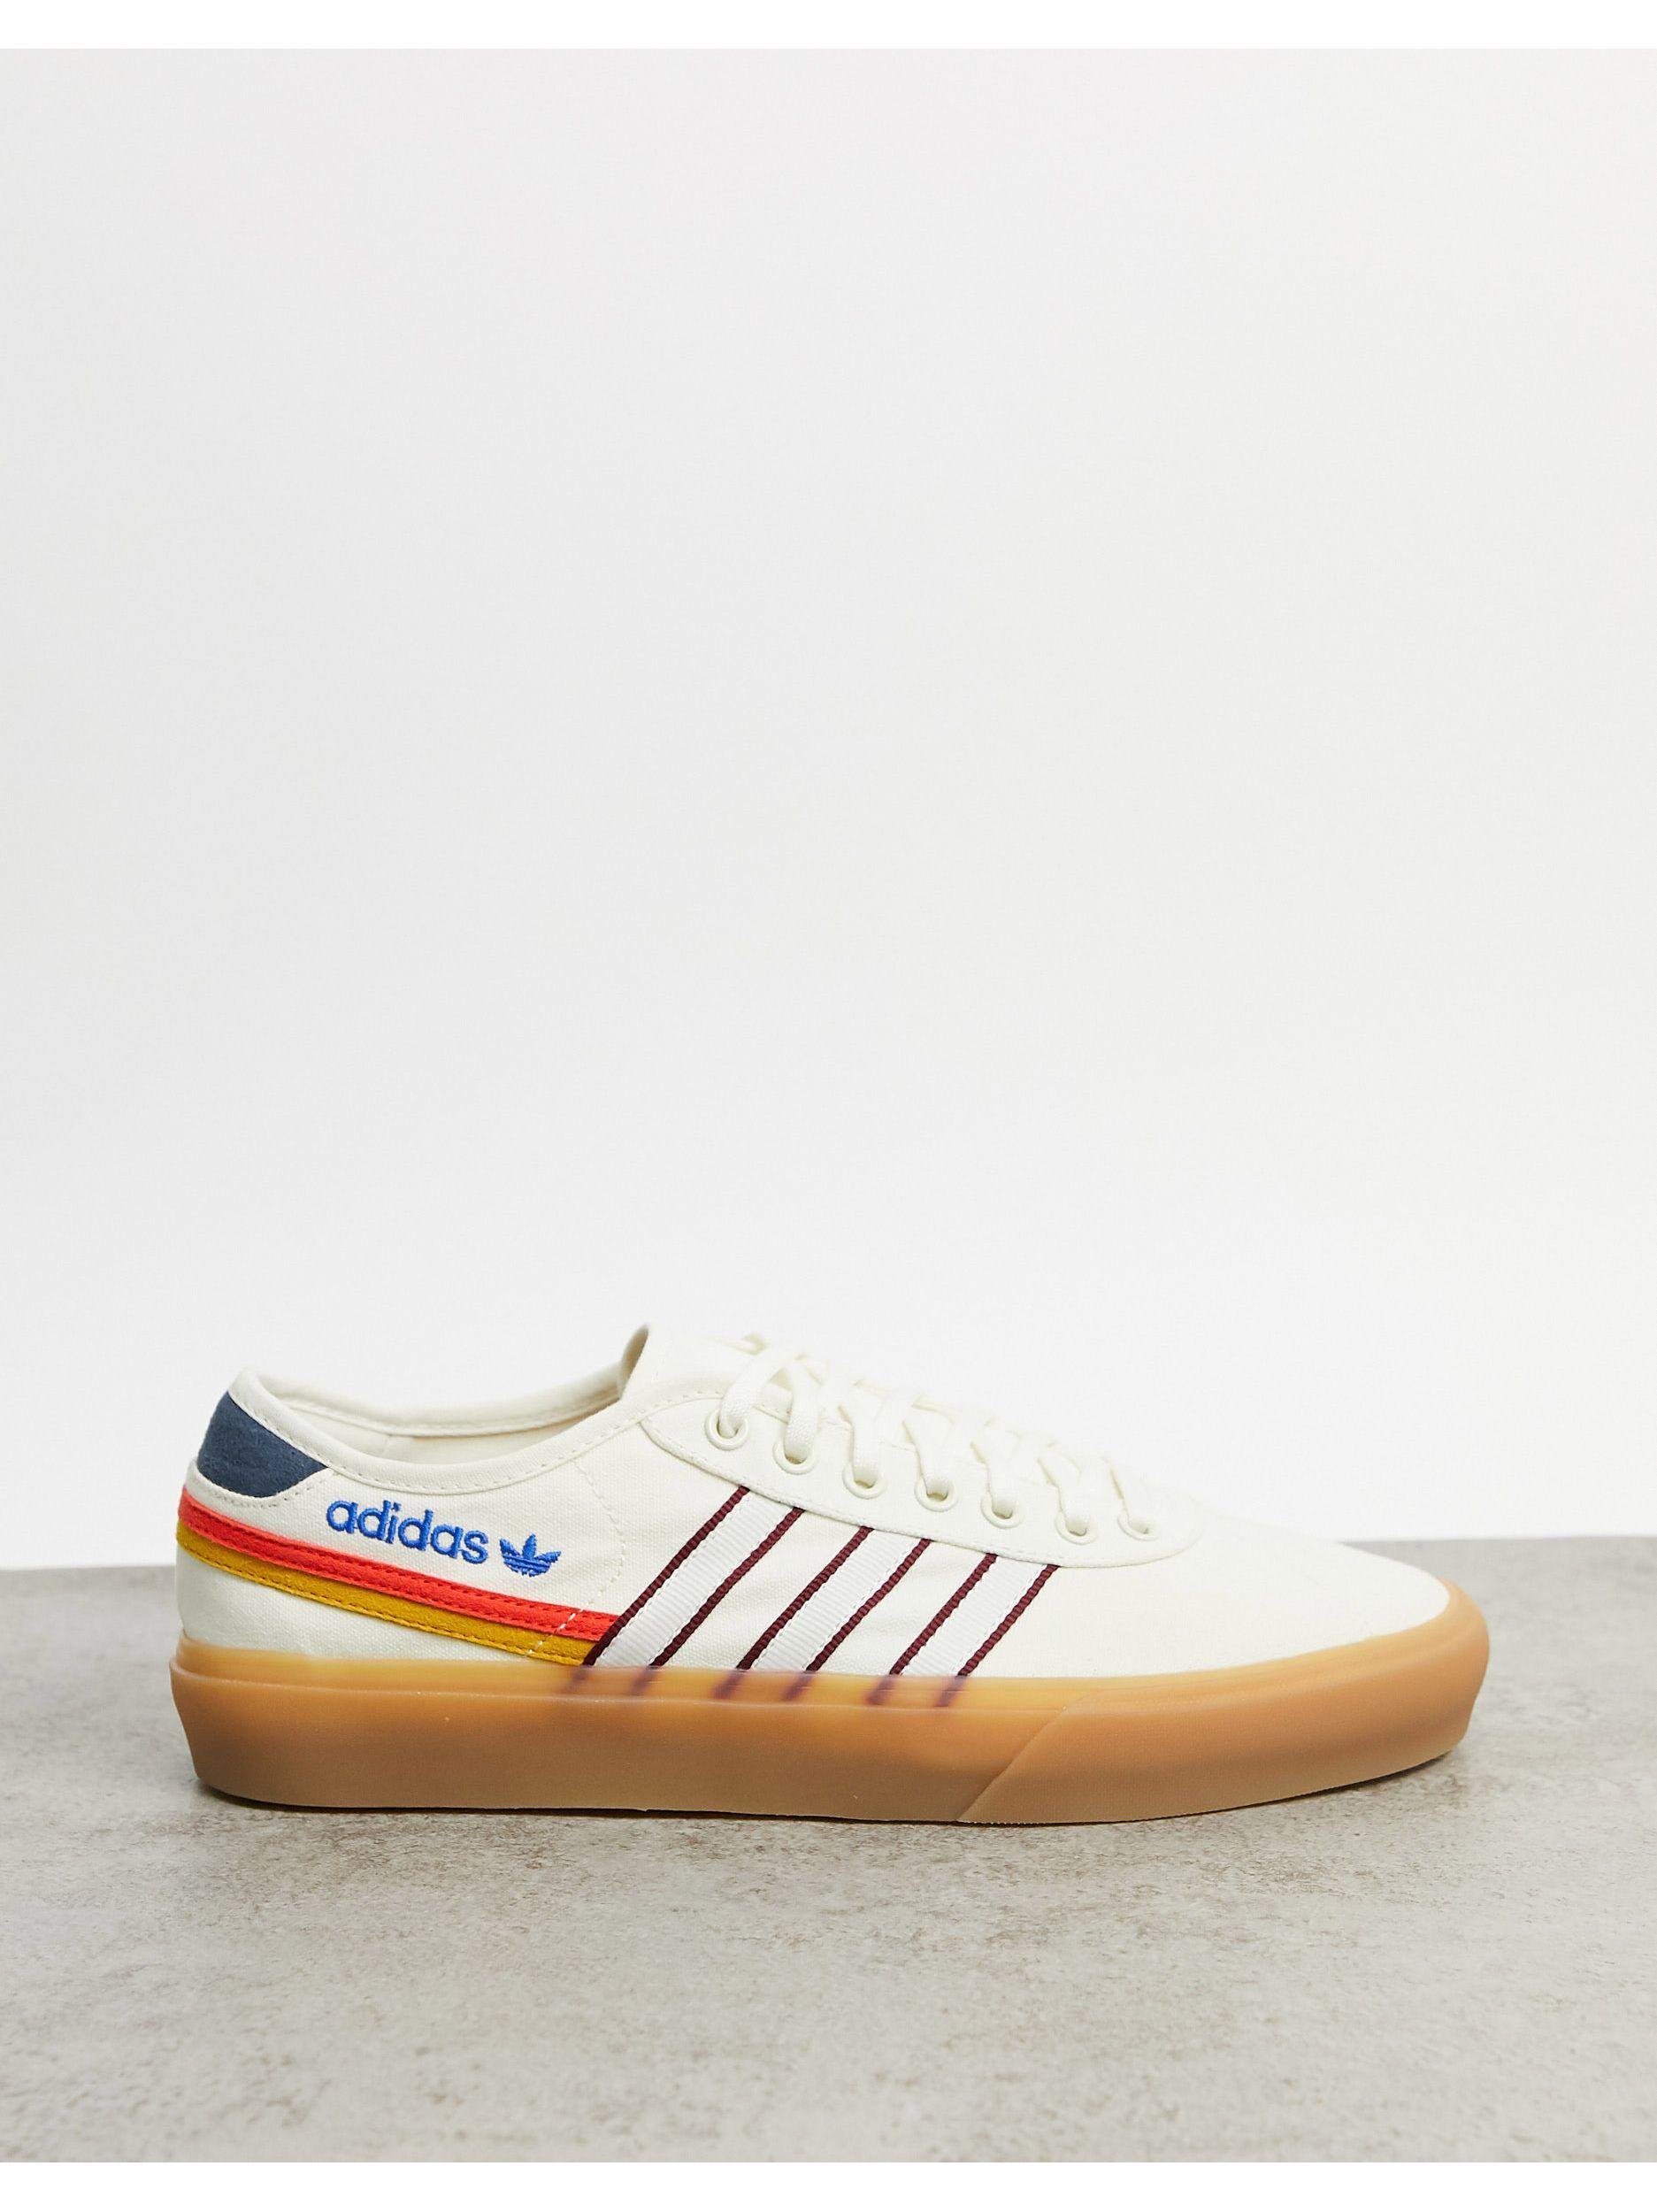 adidas Originals Delpala Happy Camping Sneakers in White | Lyst